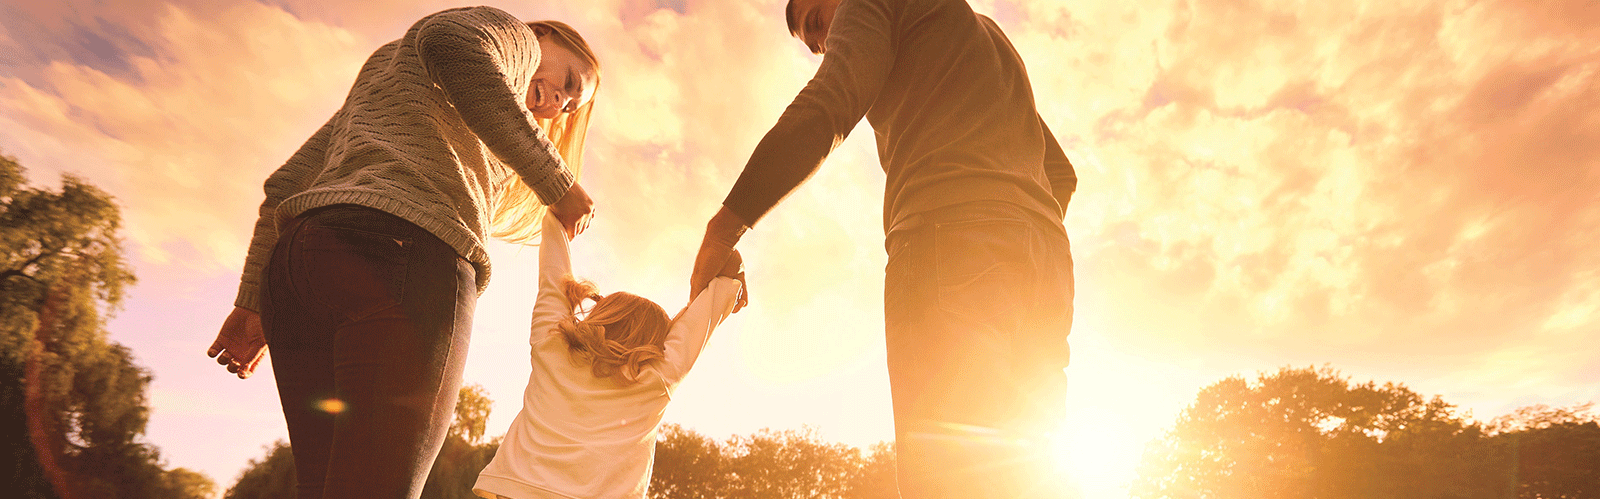 mom and dad swinging young daughter by arms during sunset